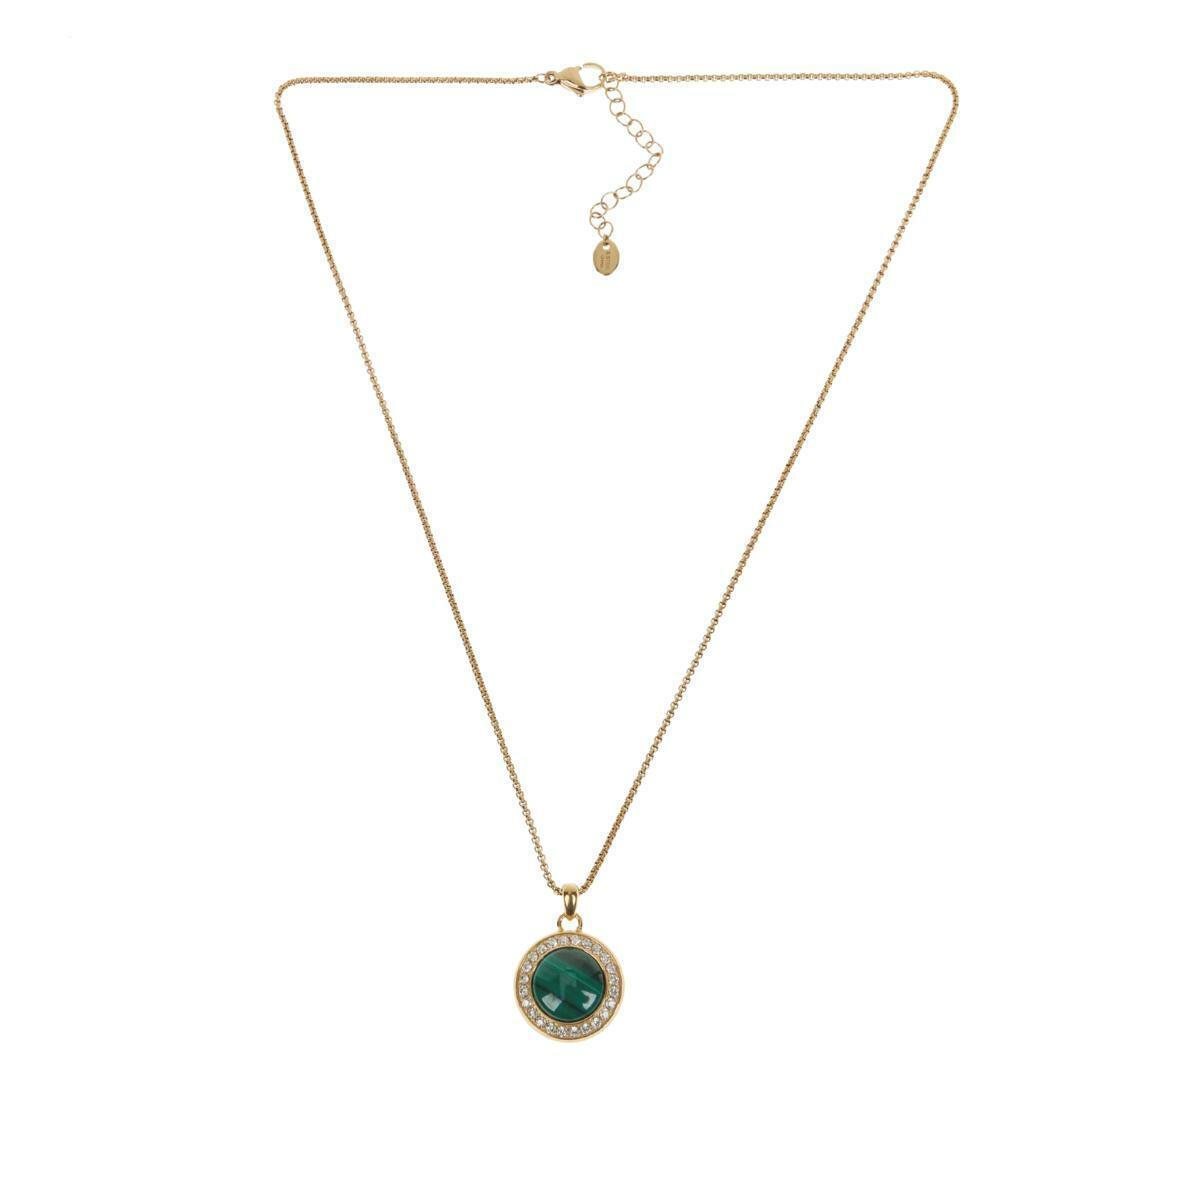 Colleen Lopez Malachite Cabochon and White Topaz Pendant with Chain, Goldtone